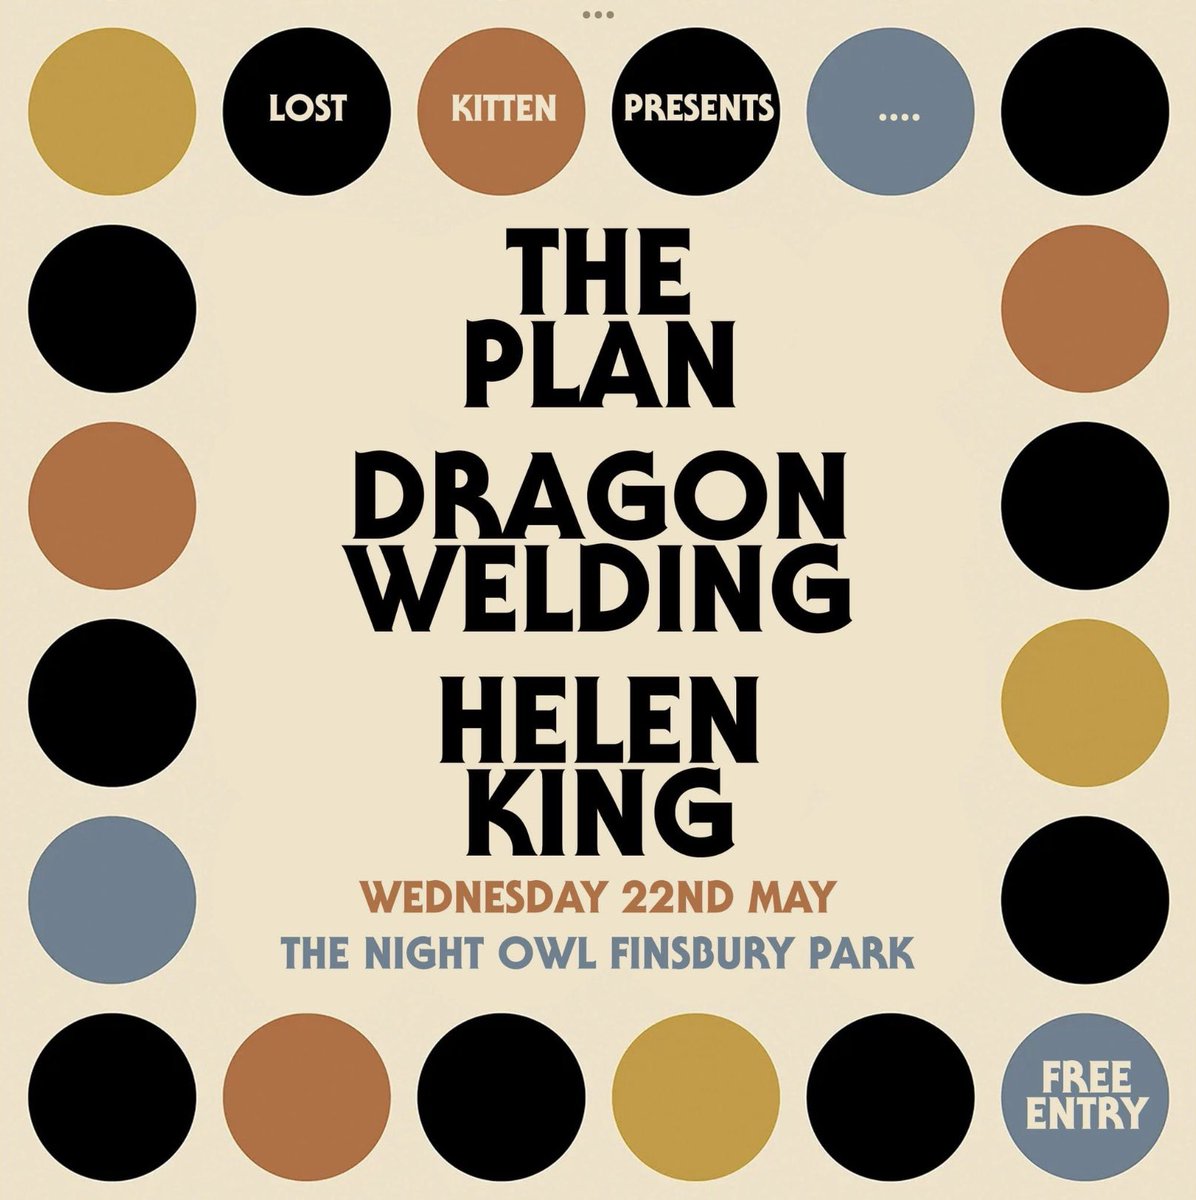 Next @WeldingDragon gig - 22nd May in Finsbury Park with The Plan and Helen King. This will the first full London gig with Nik Cockshott on vocals, and it’s free to get in. New single out May 1st via fuzzynoise1.bandcamp.com @TheWolfhounds @DimpleDiscs @DefinitiveGaze1